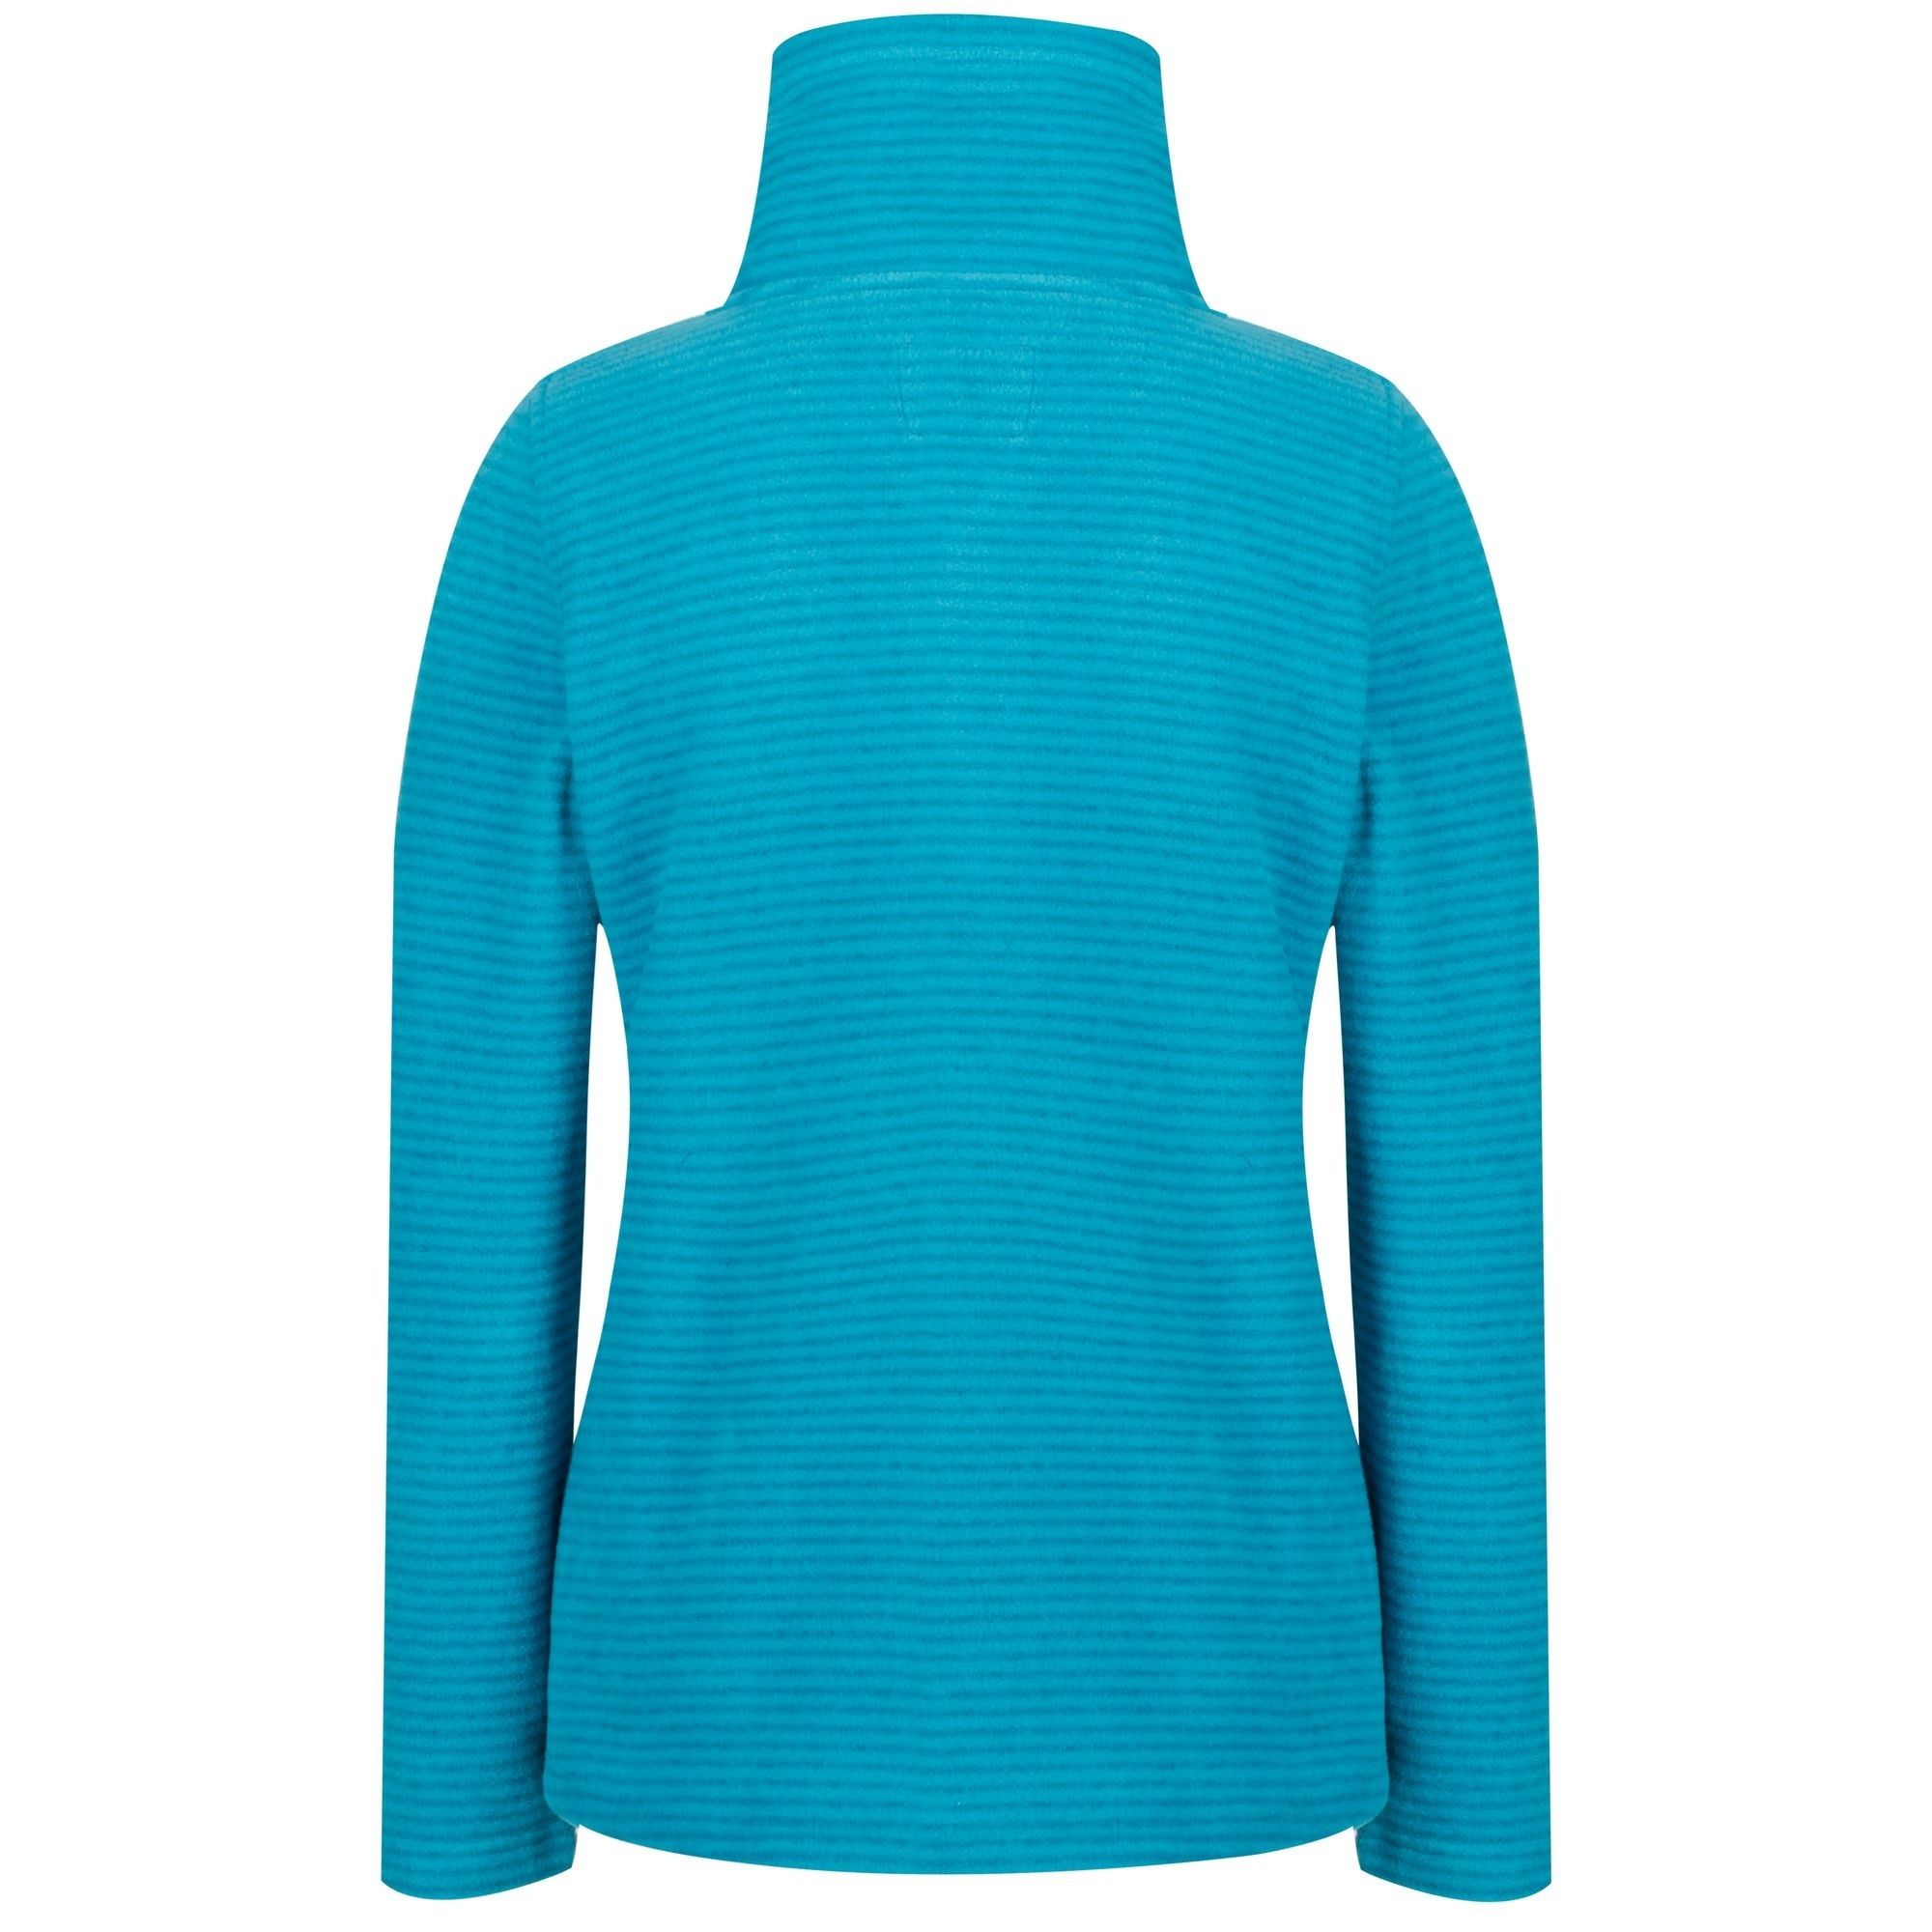 90% Polyester, 10% Viscose/rayon. 240gsm striped Symmetry fleece. Half zipper. Ideal to keep you warm during cold seasons.